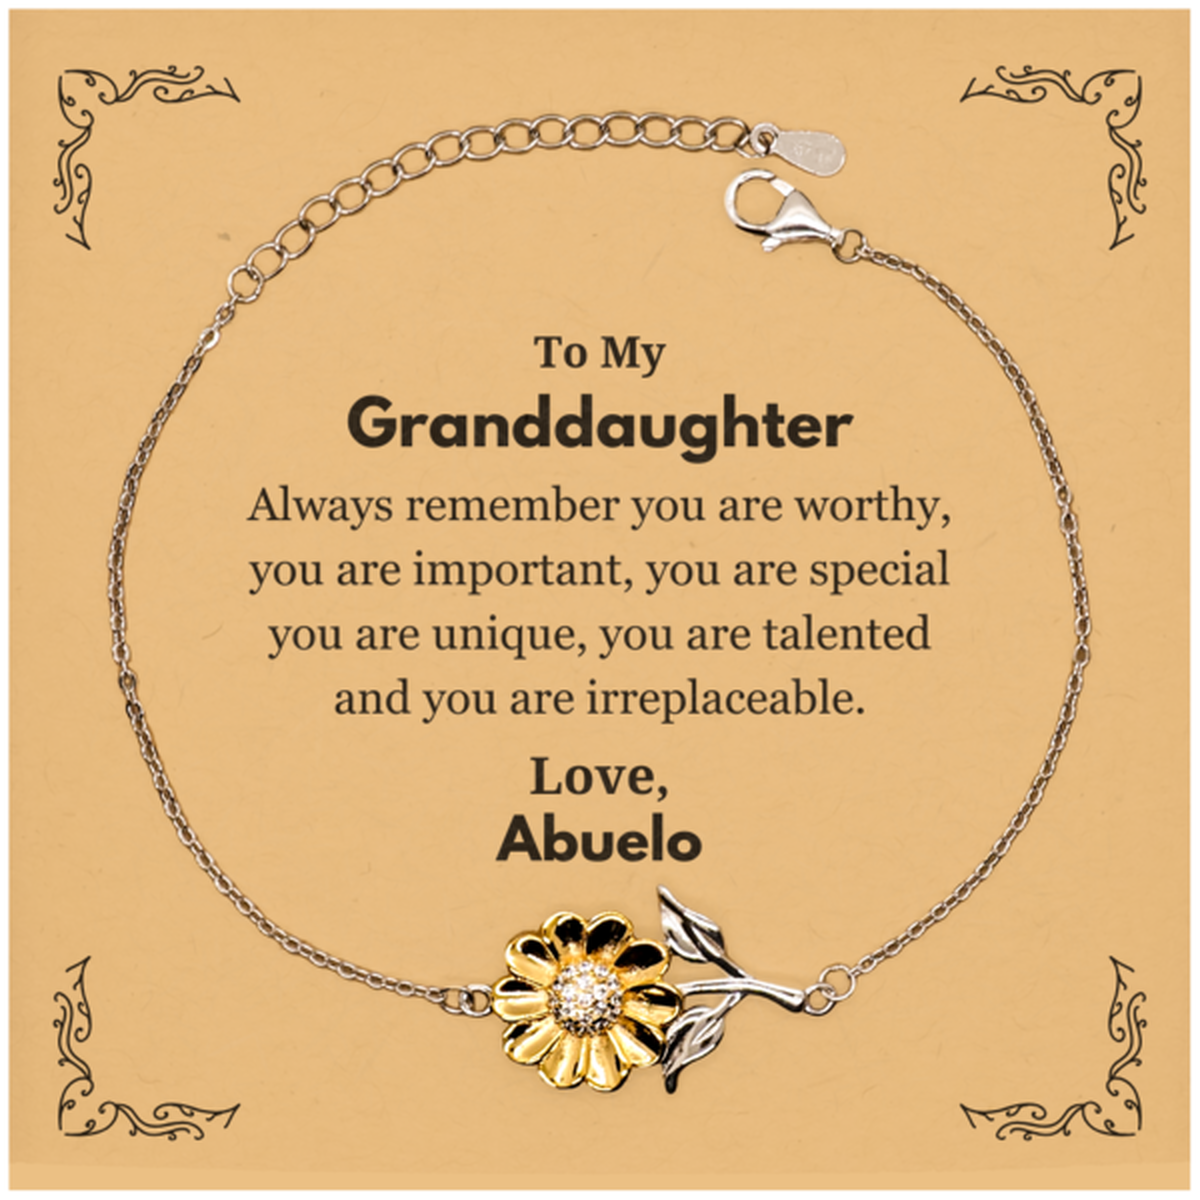 Granddaughter Birthday Gifts from Abuelo, Inspirational Sunflower Bracelet for Granddaughter Christmas Graduation Gifts for Granddaughter Always remember you are worthy, you are important. Love, Abuelo